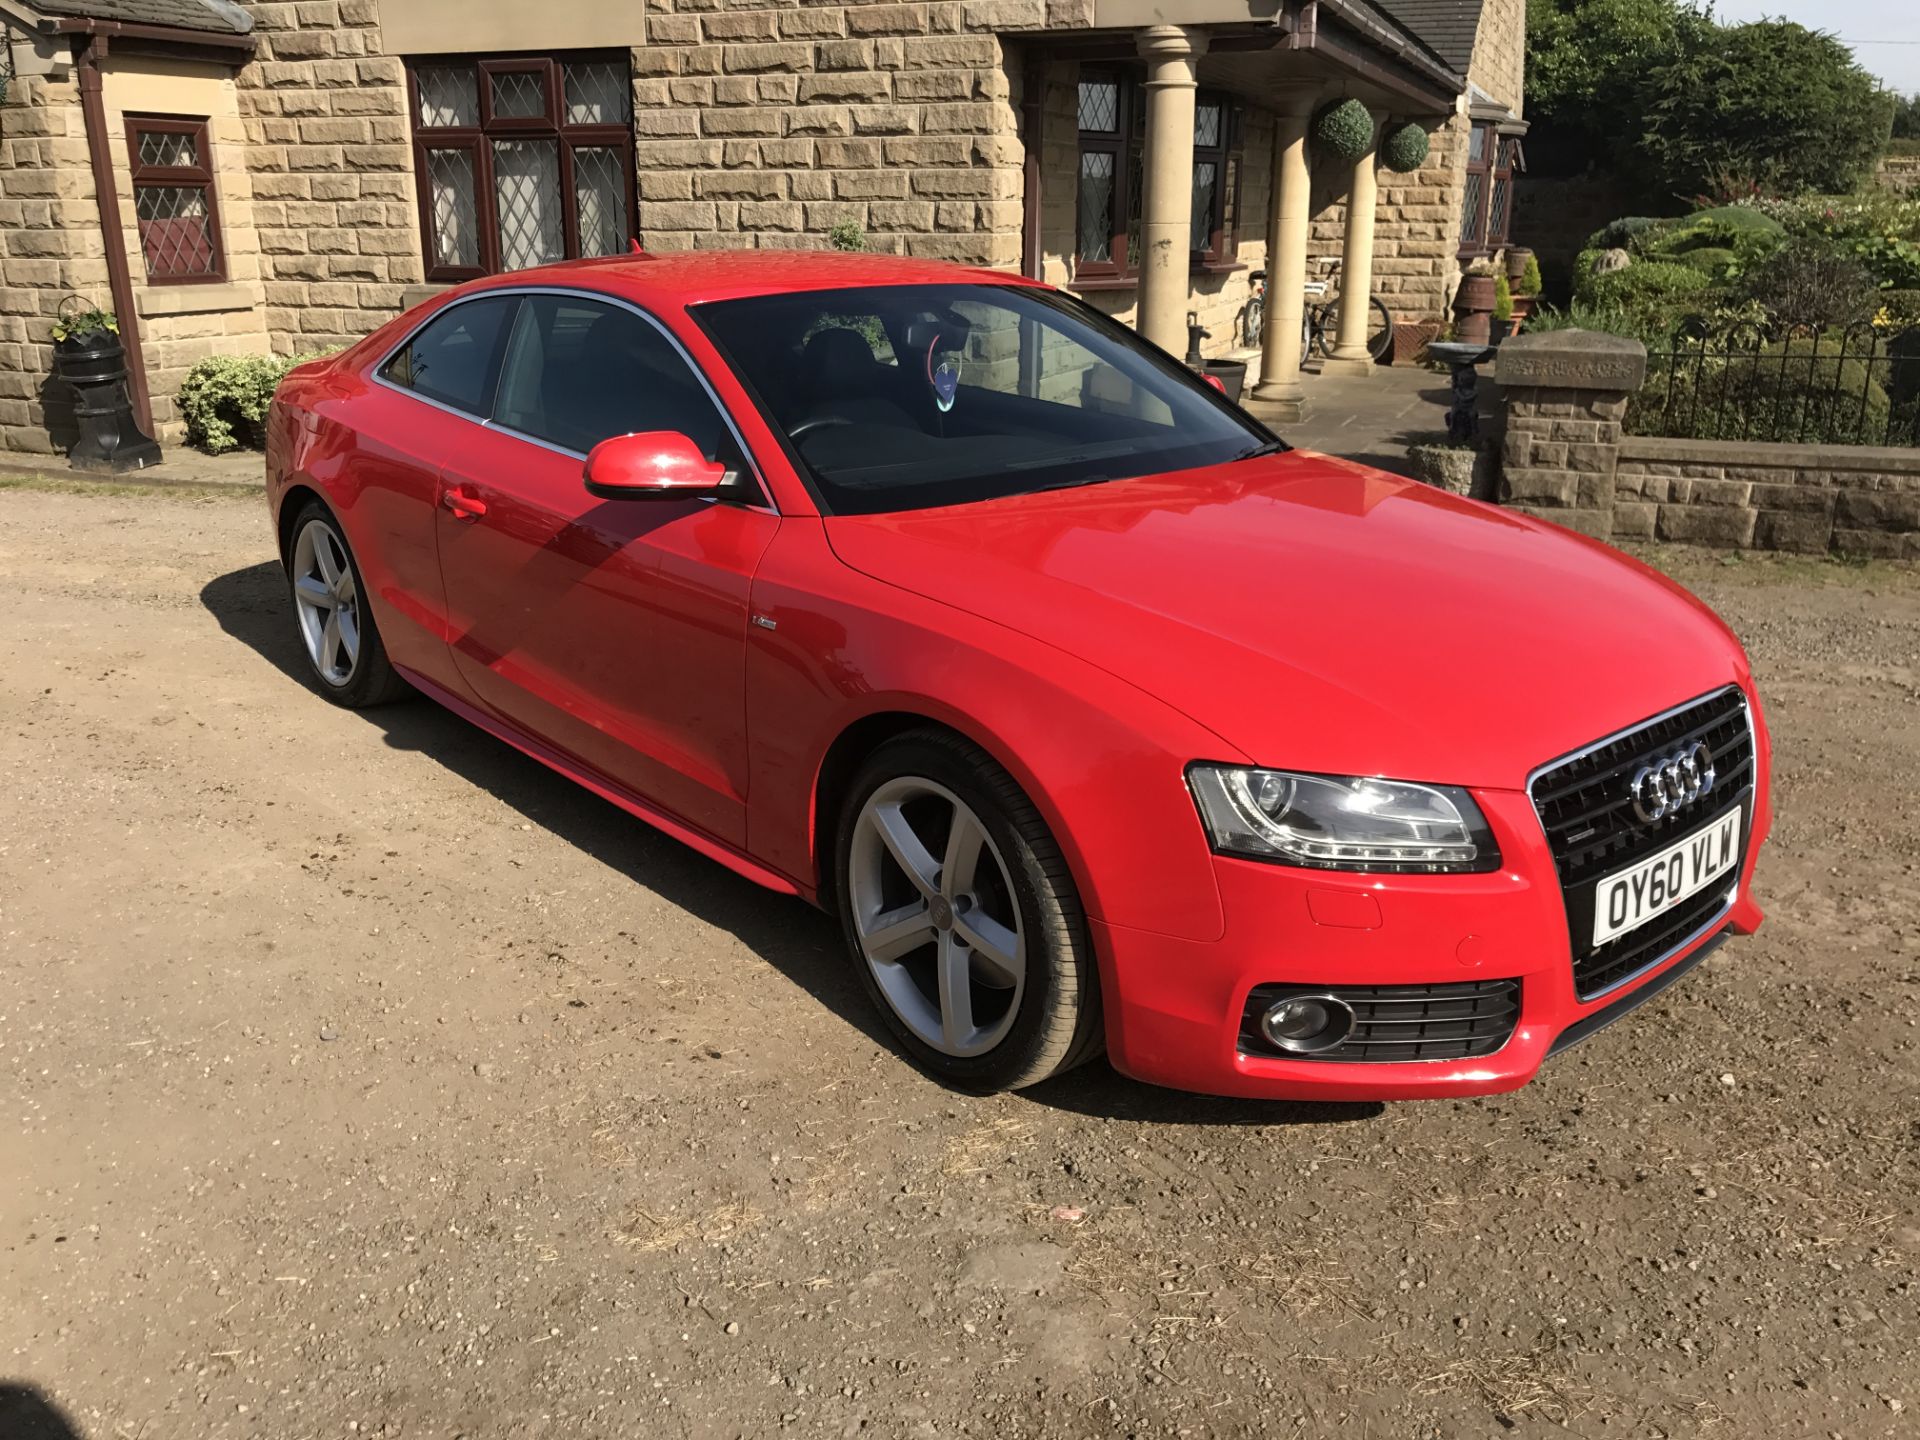 2010/60 REG AUDI A5 S LINE TDI QUATTRO SEMI-AUTOMATIC 3.0 LITRE, SHOWING 2 FORMER KEEPERS *NO VAT* - Image 2 of 17